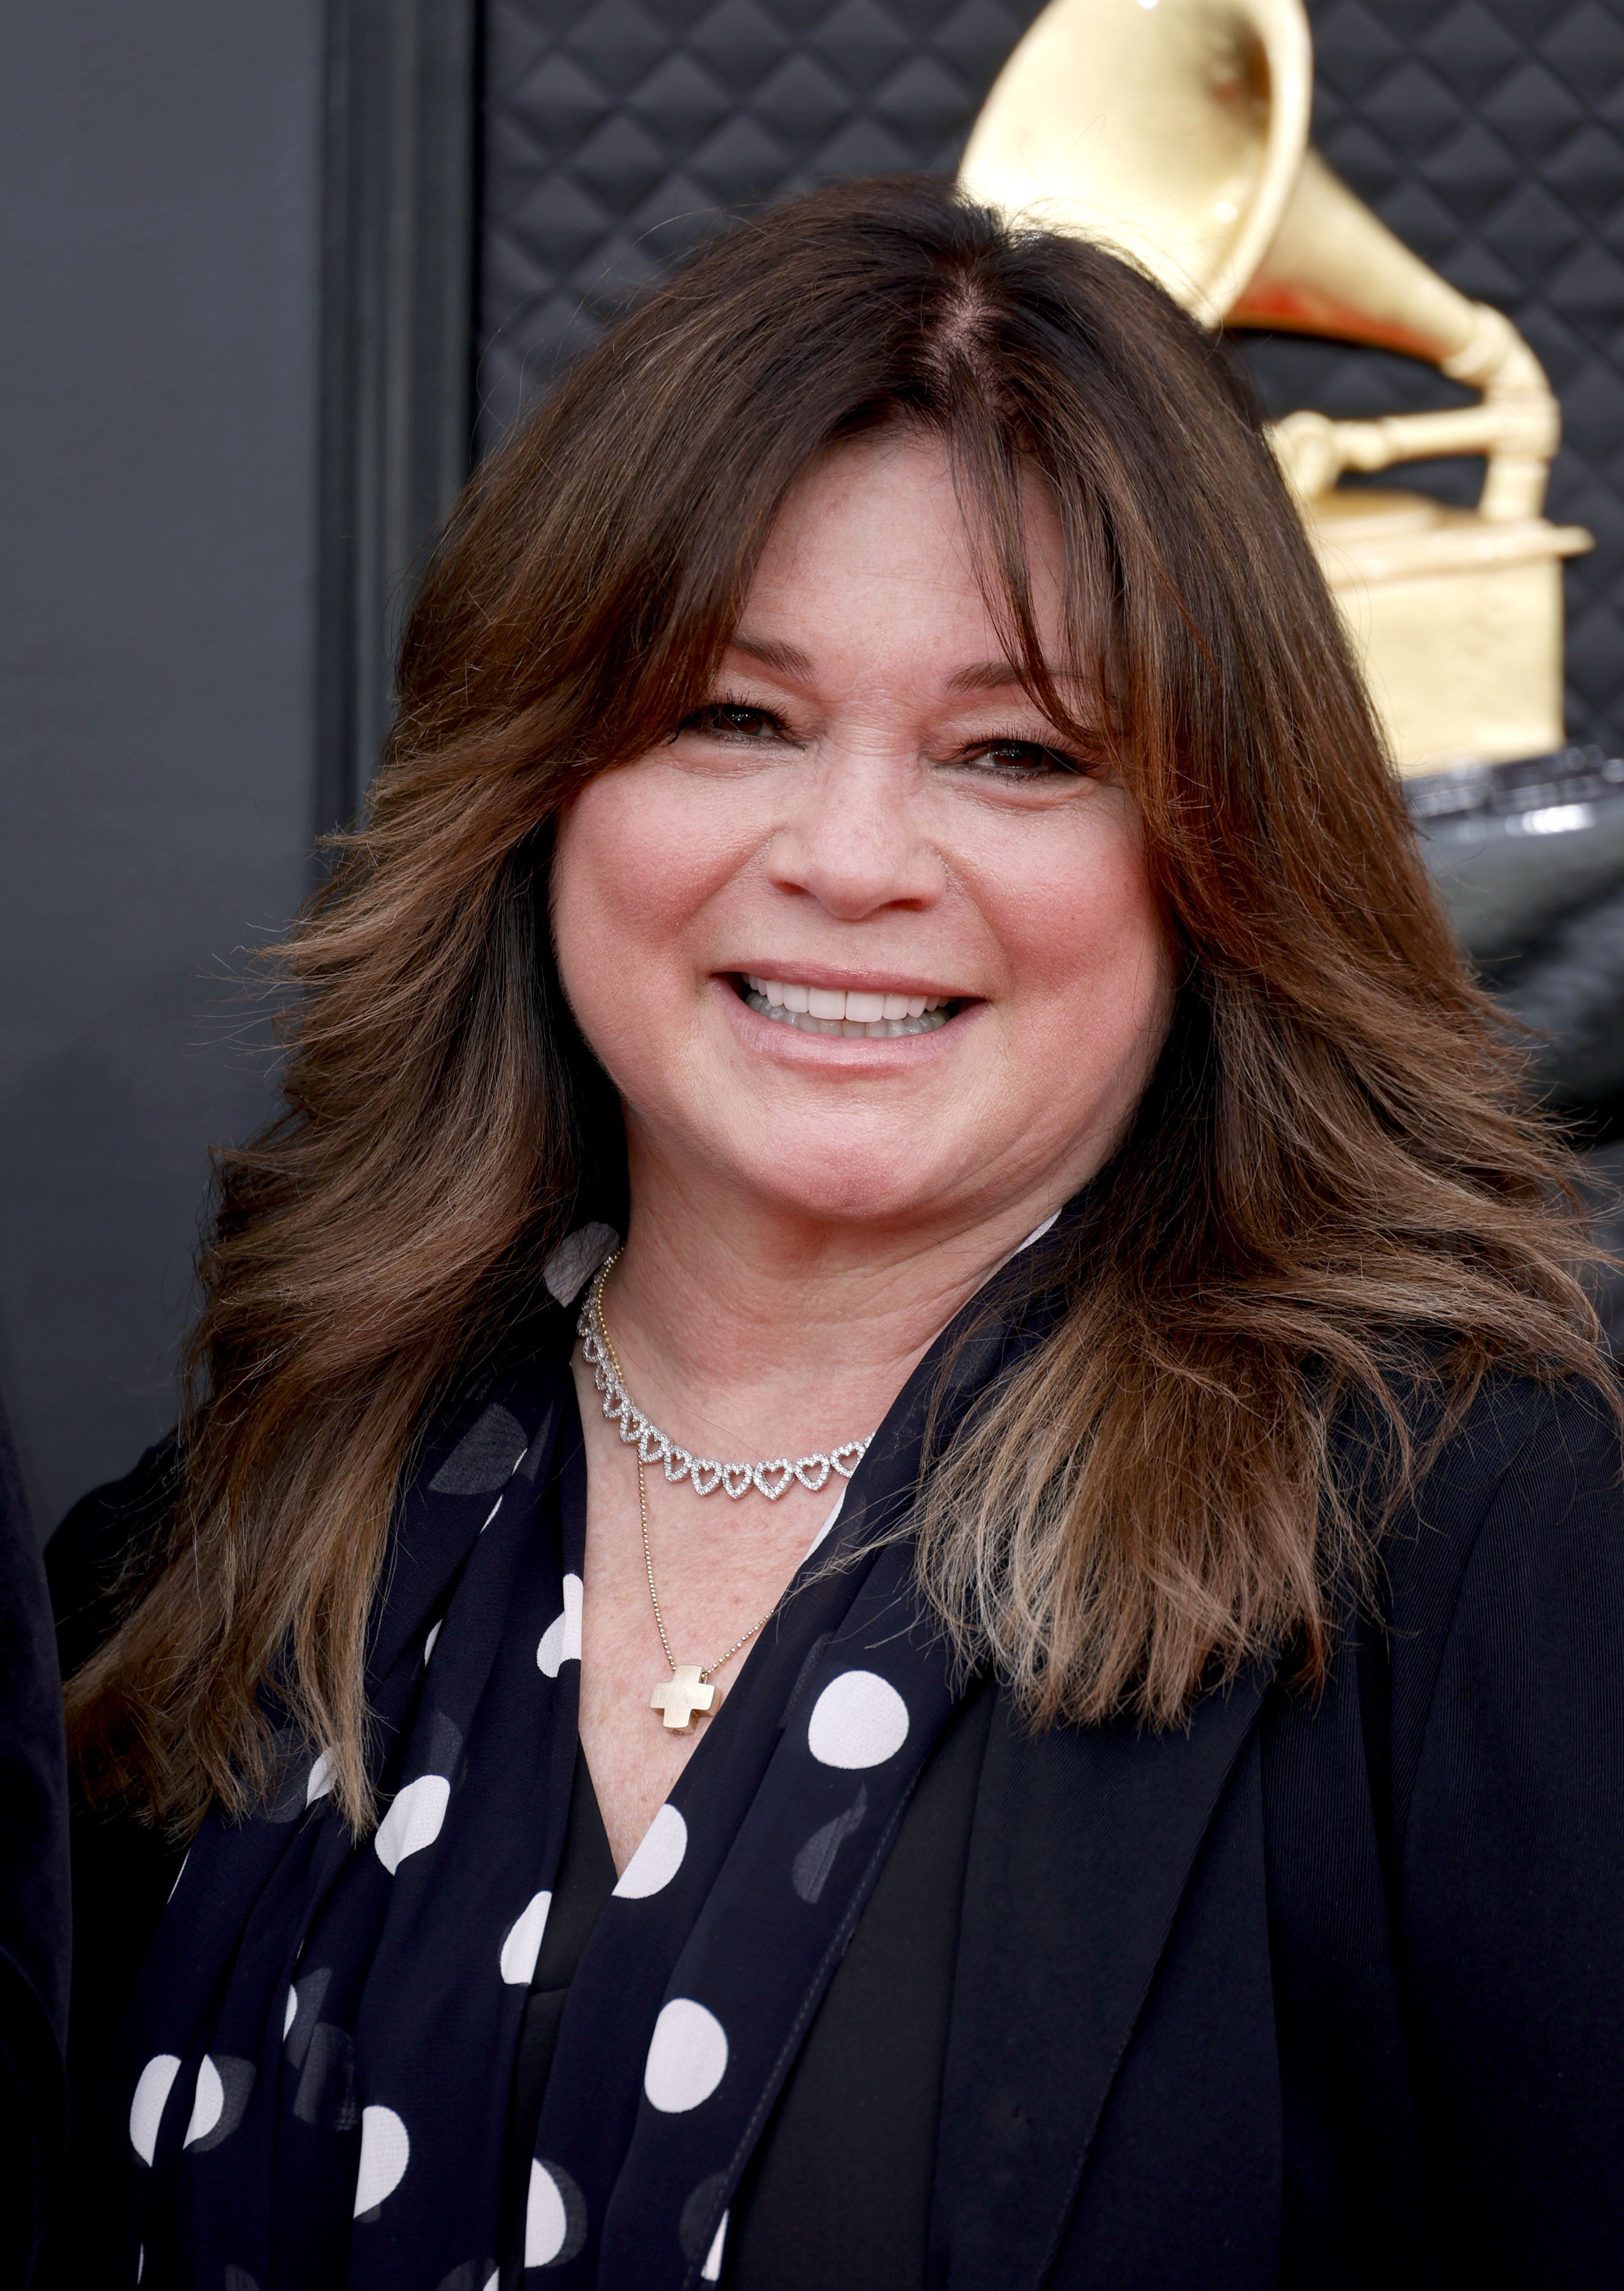 Valerie Bertinelli at the 64th Annual Grammy Awards in Las Vegas, Nevada on April 3, 2022 | Source: Getty Images